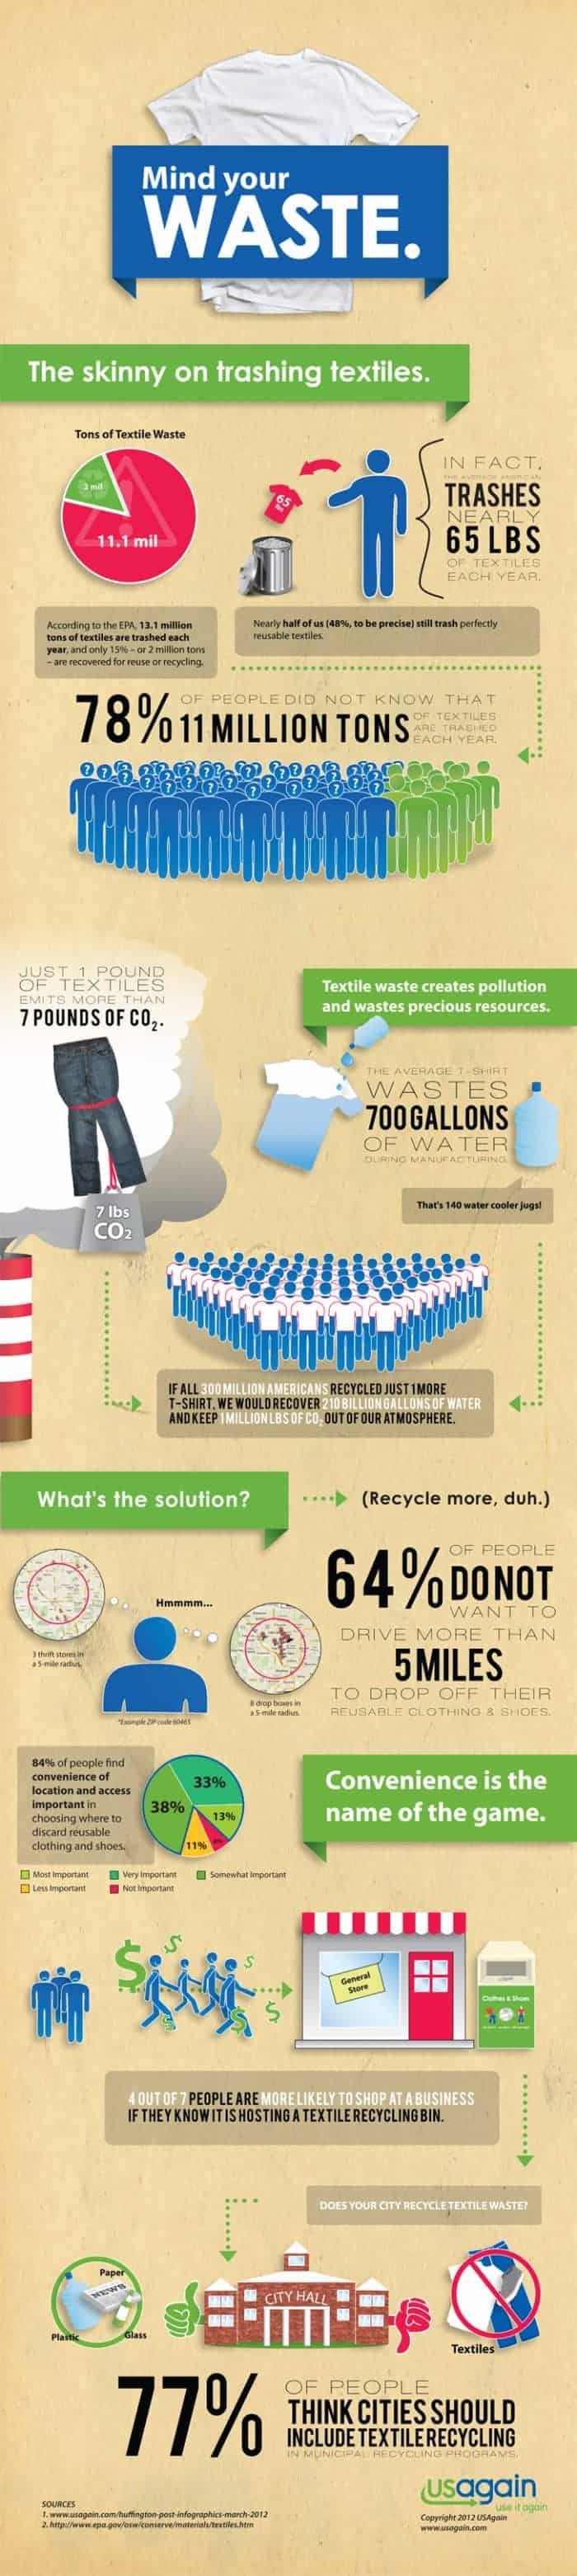 How Many Pounds of Textiles Are Trashed Every Year